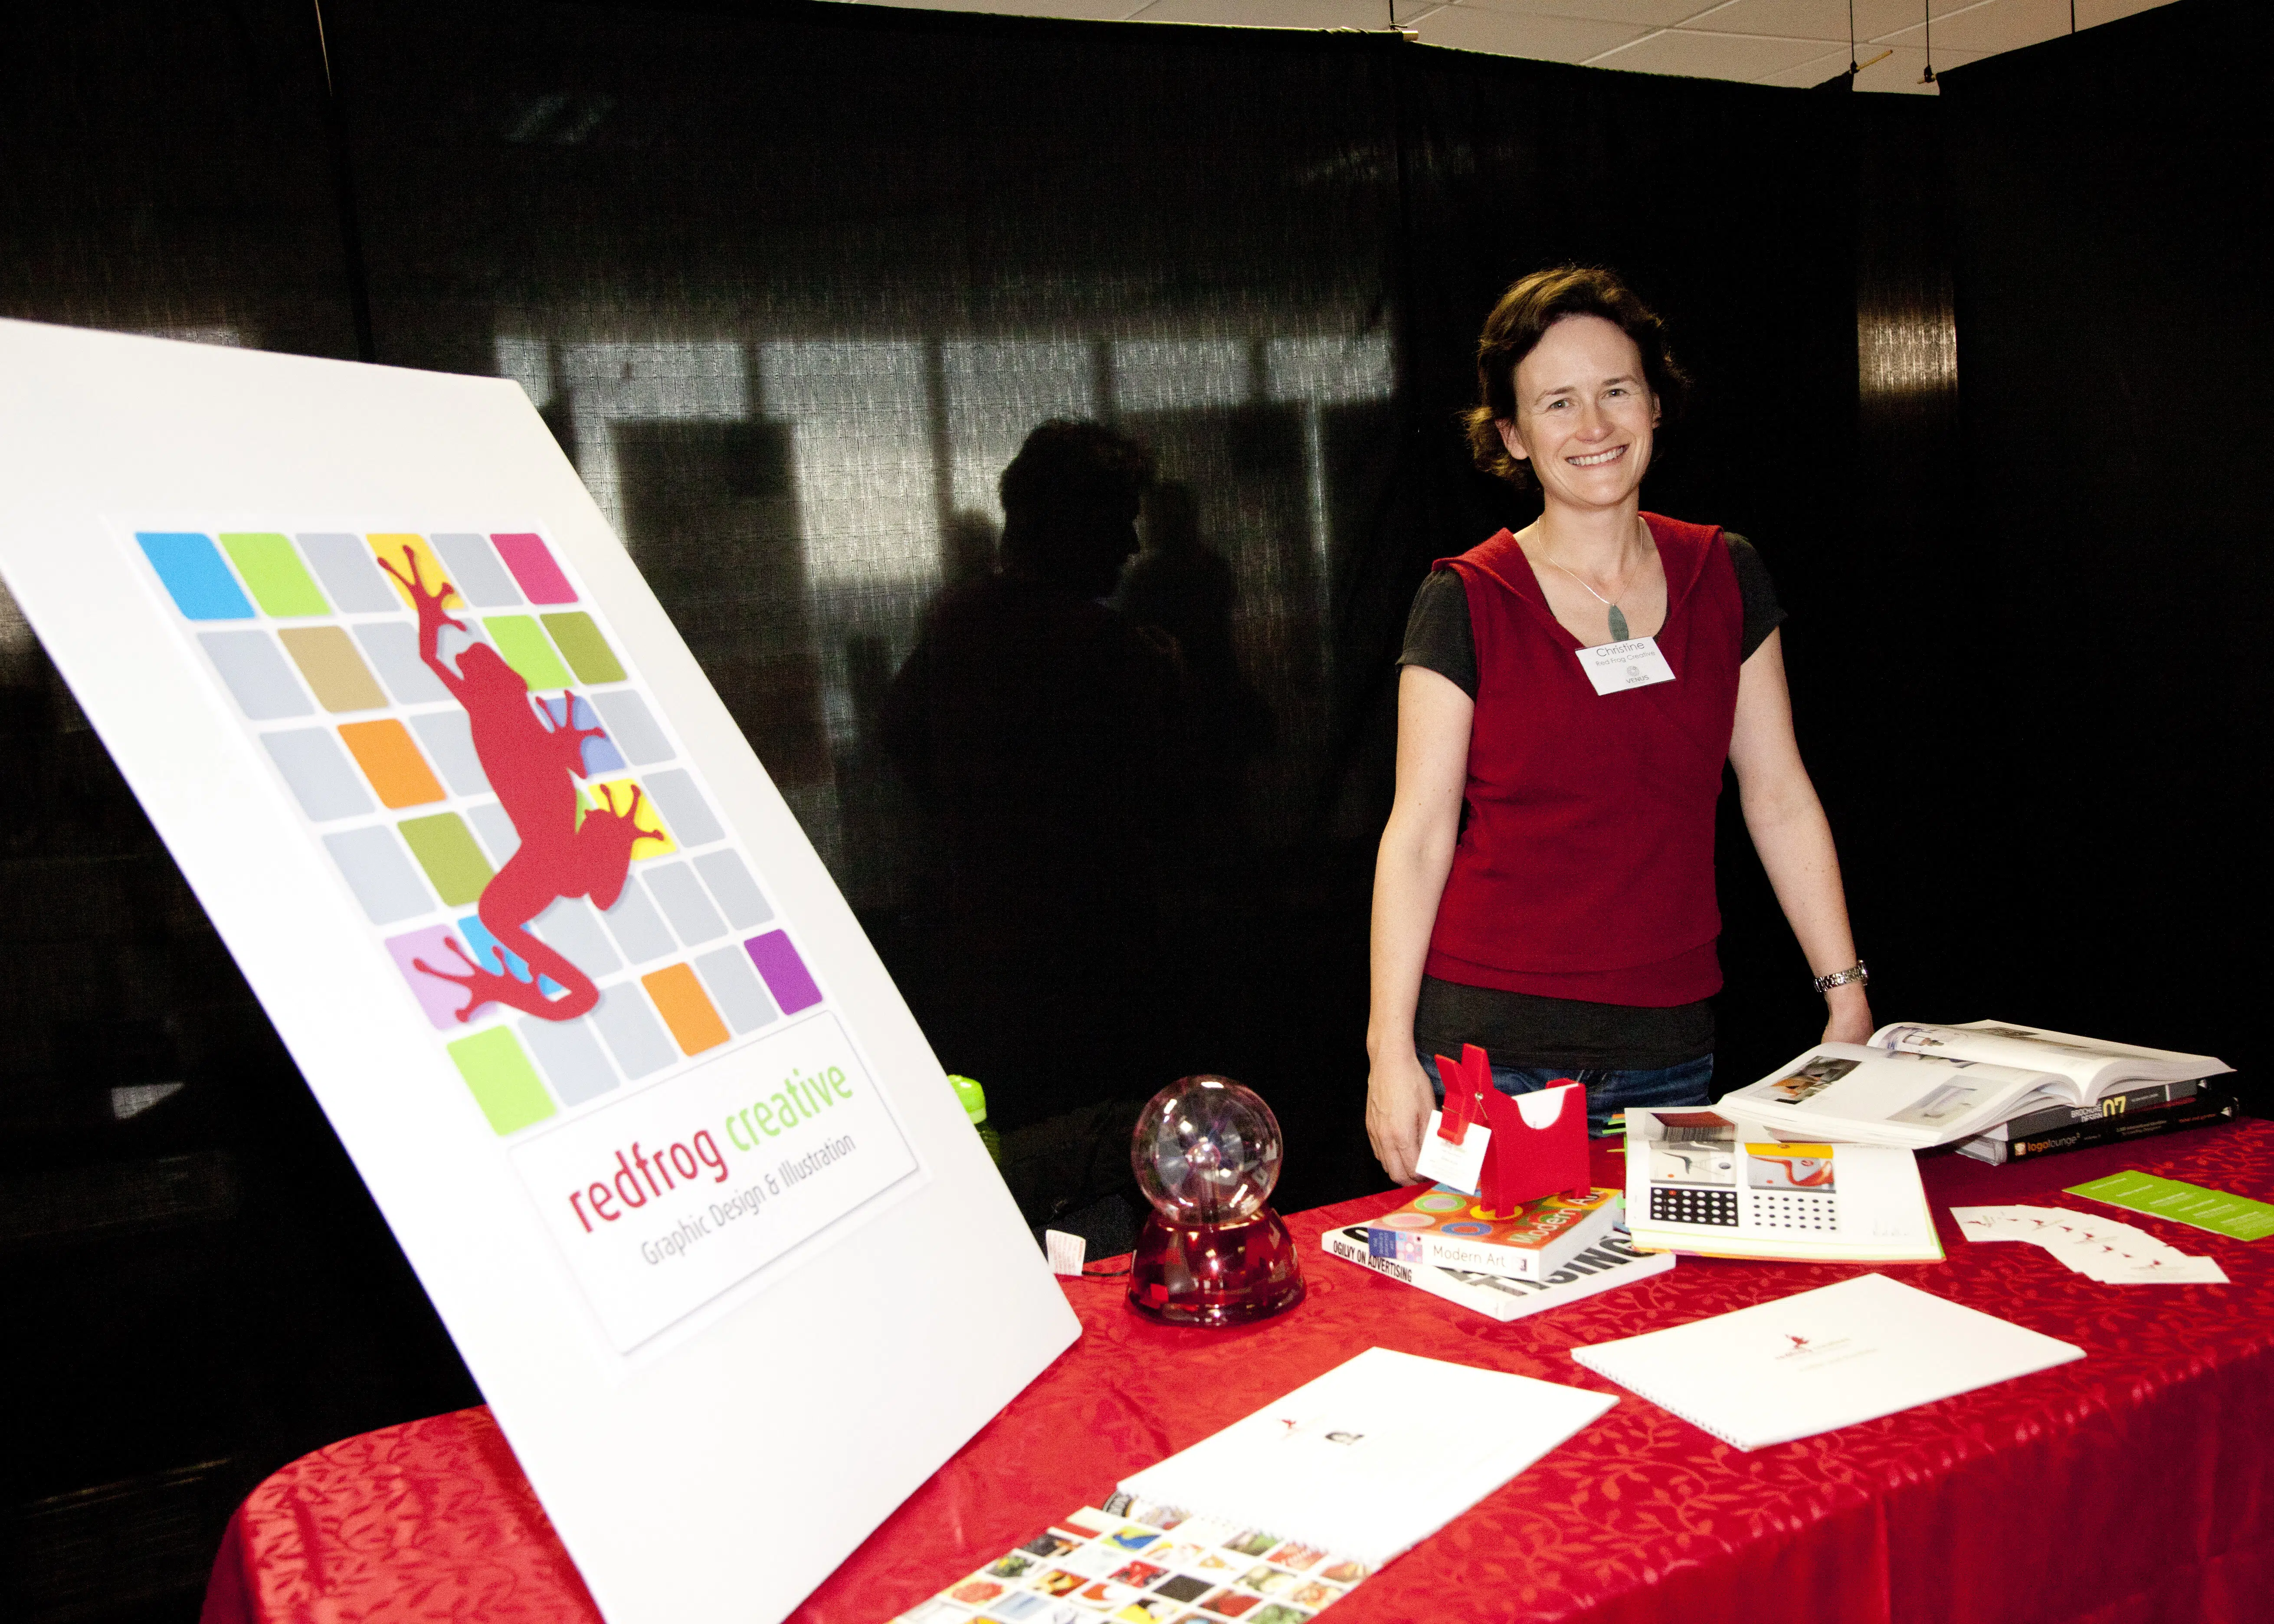 Christine McCurdy of Redfrog Creative at the Venus Network expo, Takapuna, Auckland